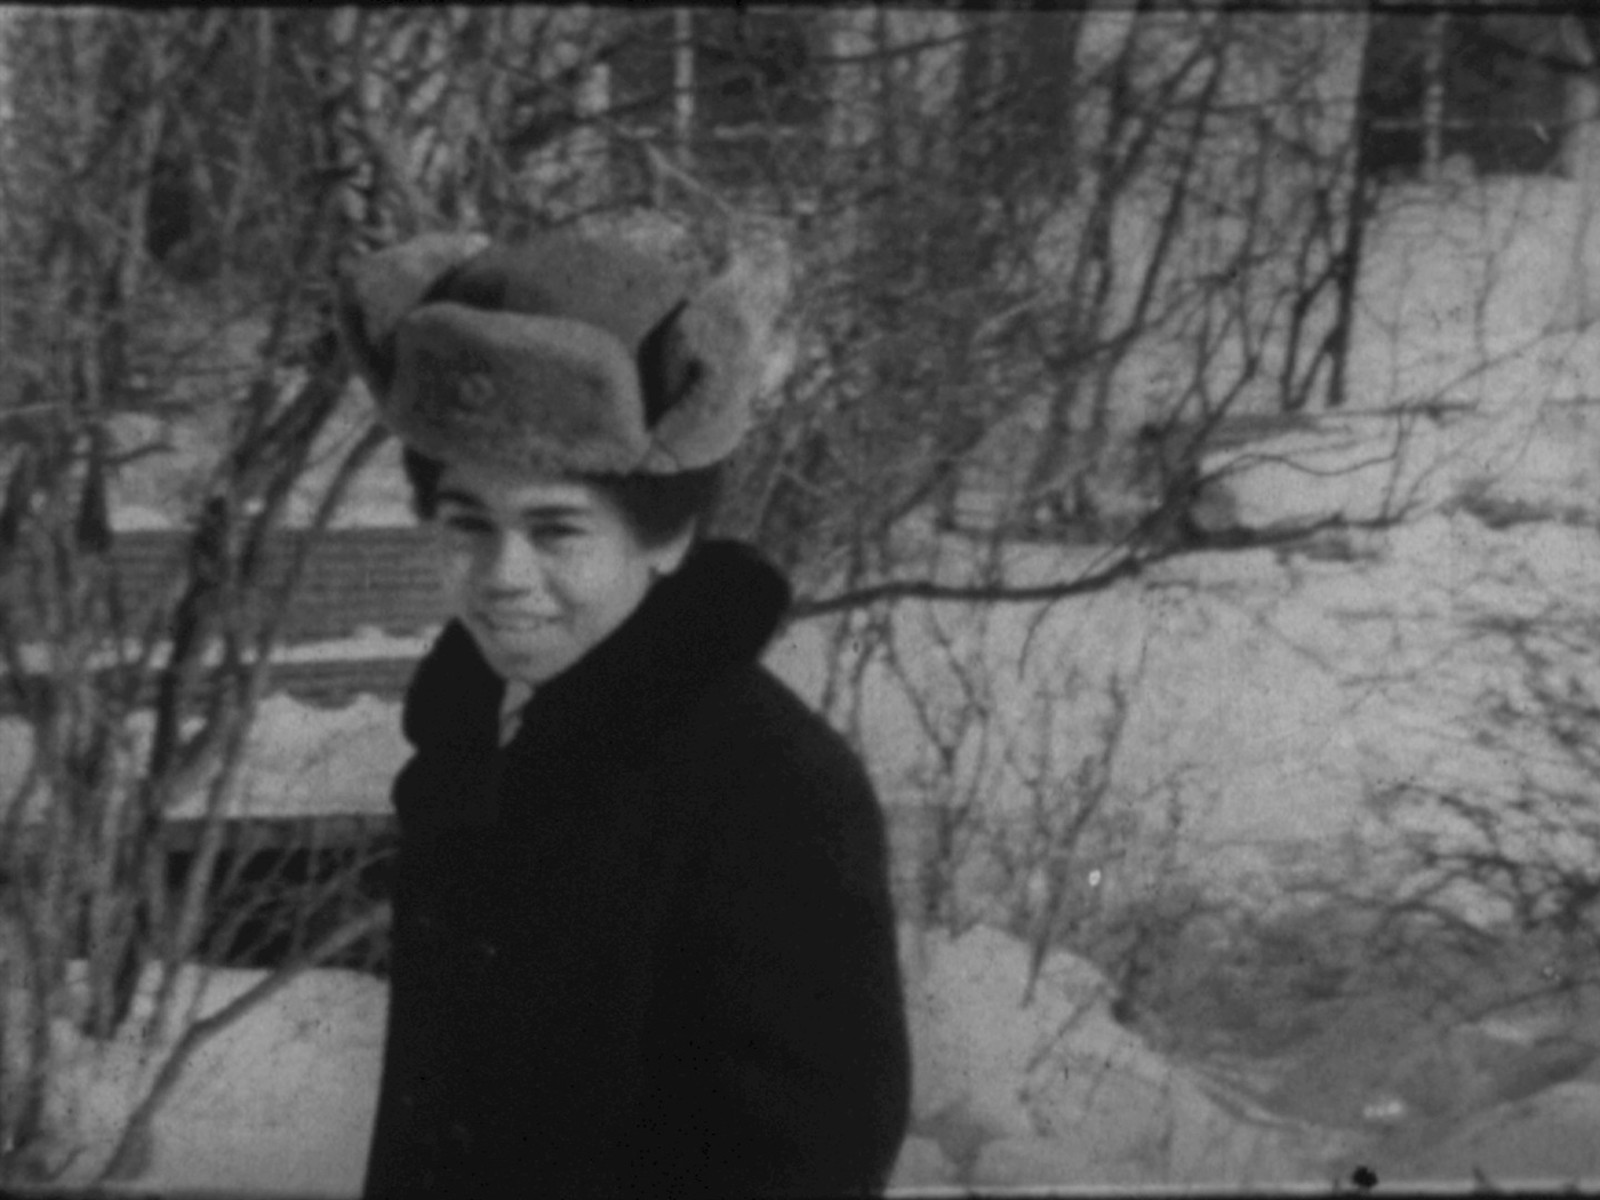 Stills from a 16mm film reel with the label &ldquo;Ivanov boarding school.&rdquo; Unknown source, found at the INCA, Bissau, and digitized in 2012 by the Arsenal &ndash; Institute for Film and Video Art, Berlin, for the project ''Luta ca caba inda&rsquo;' Filipa C&eacute;sar